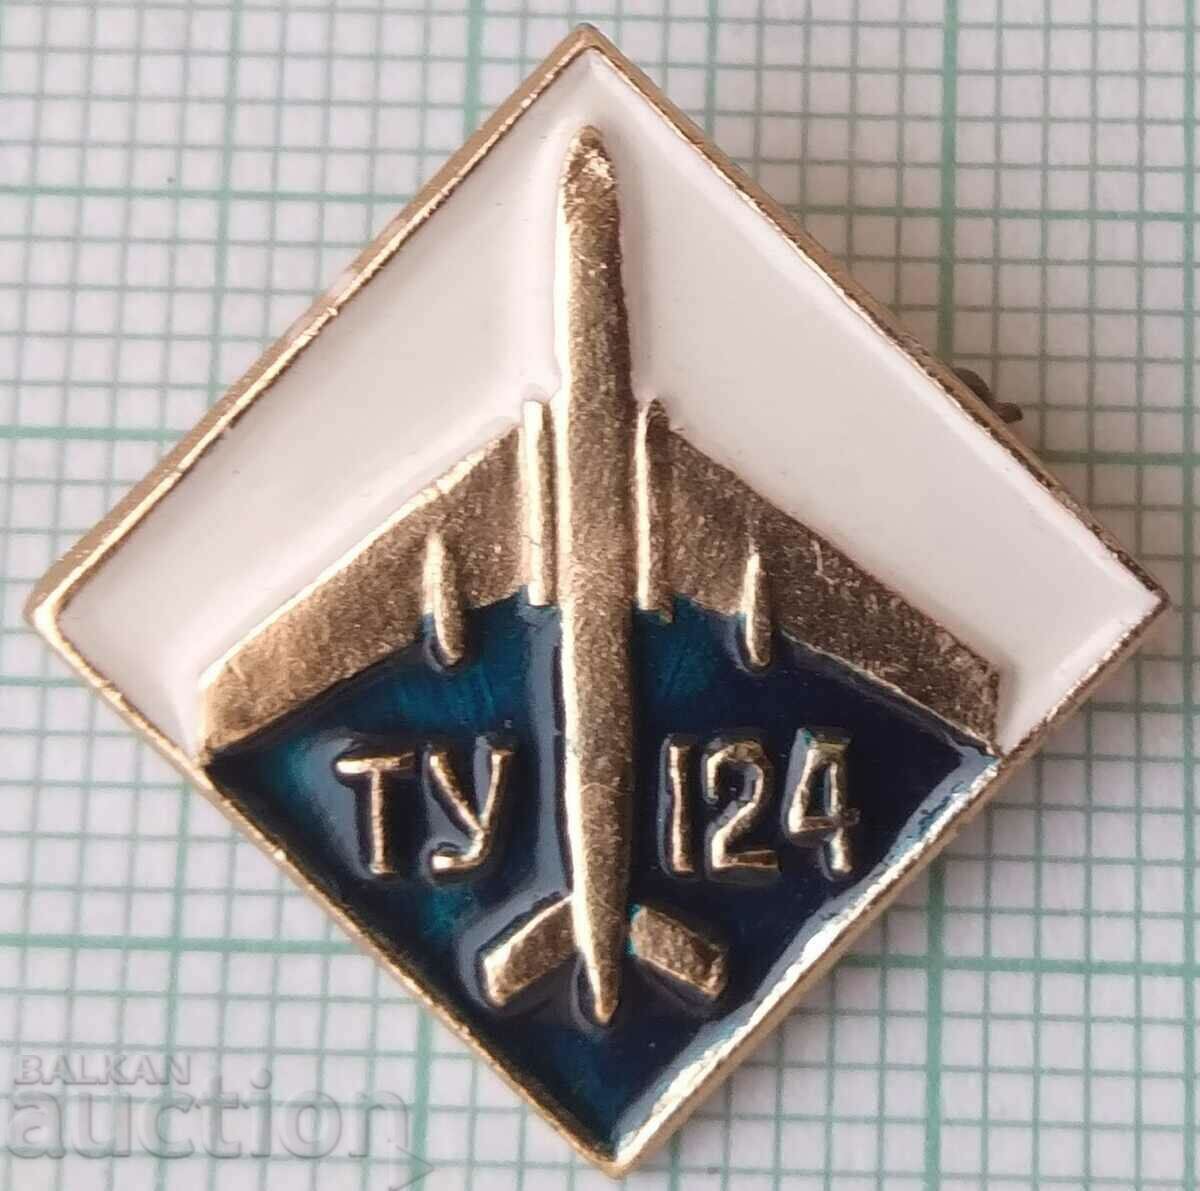 13473 Badge - Aviation in the USSR TU-124 aircraft